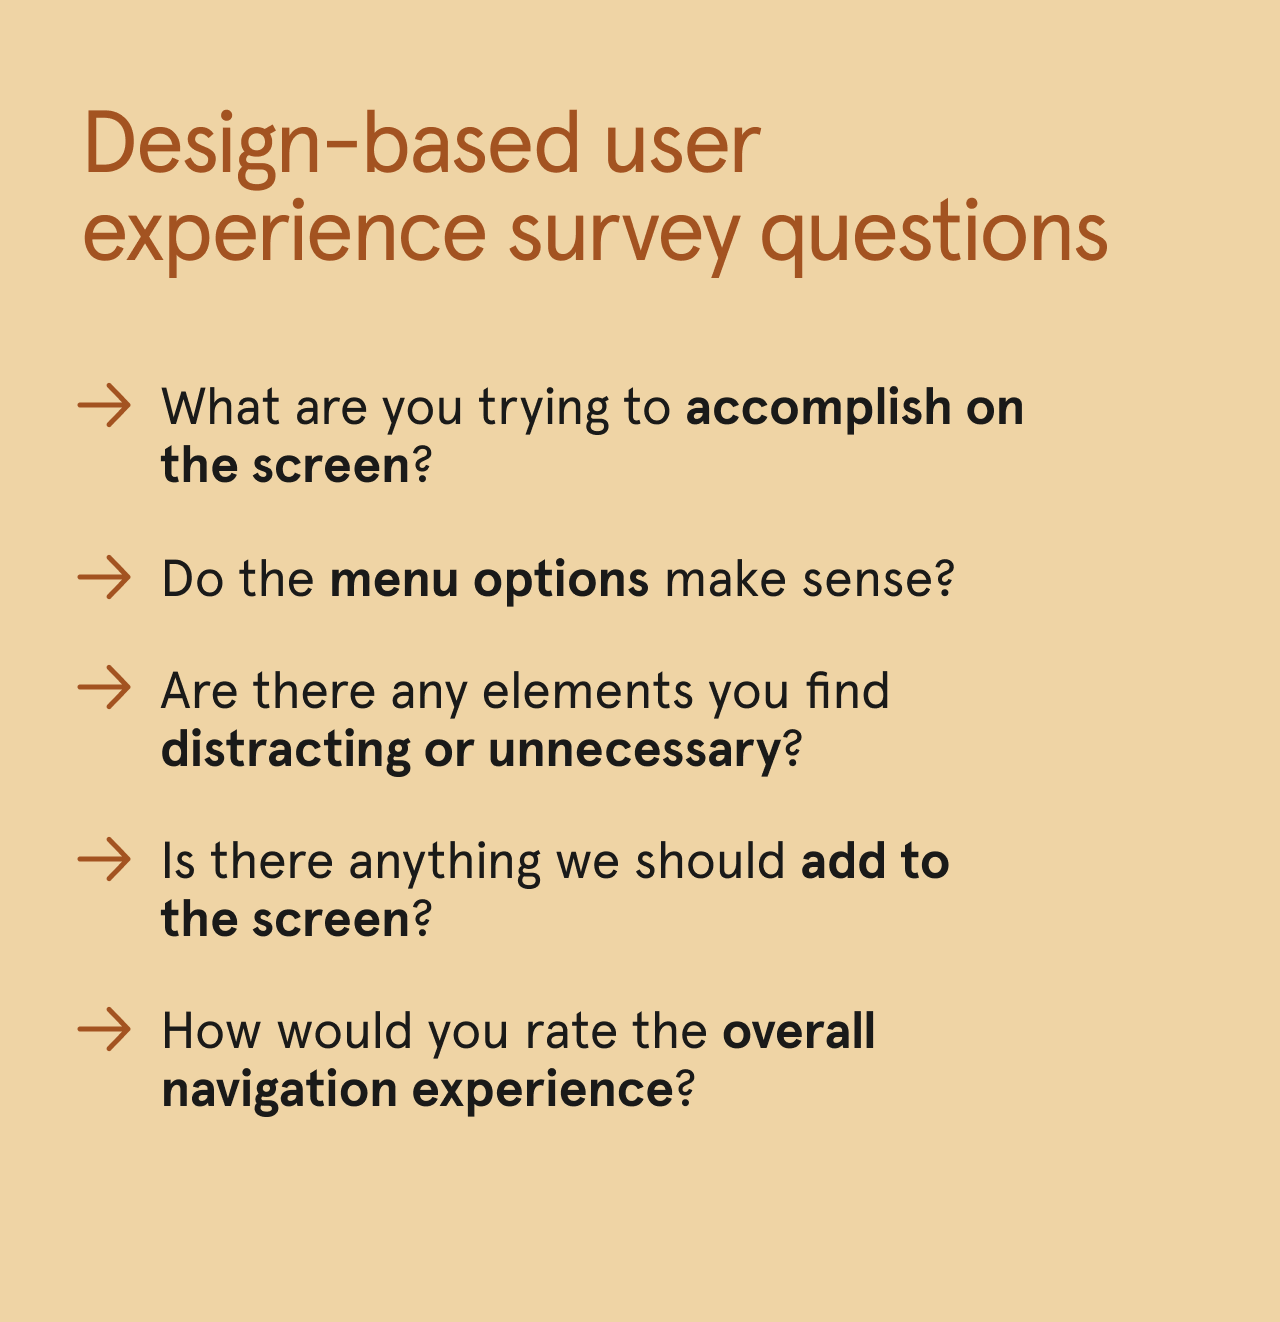 List of design-based user experience survey questions.